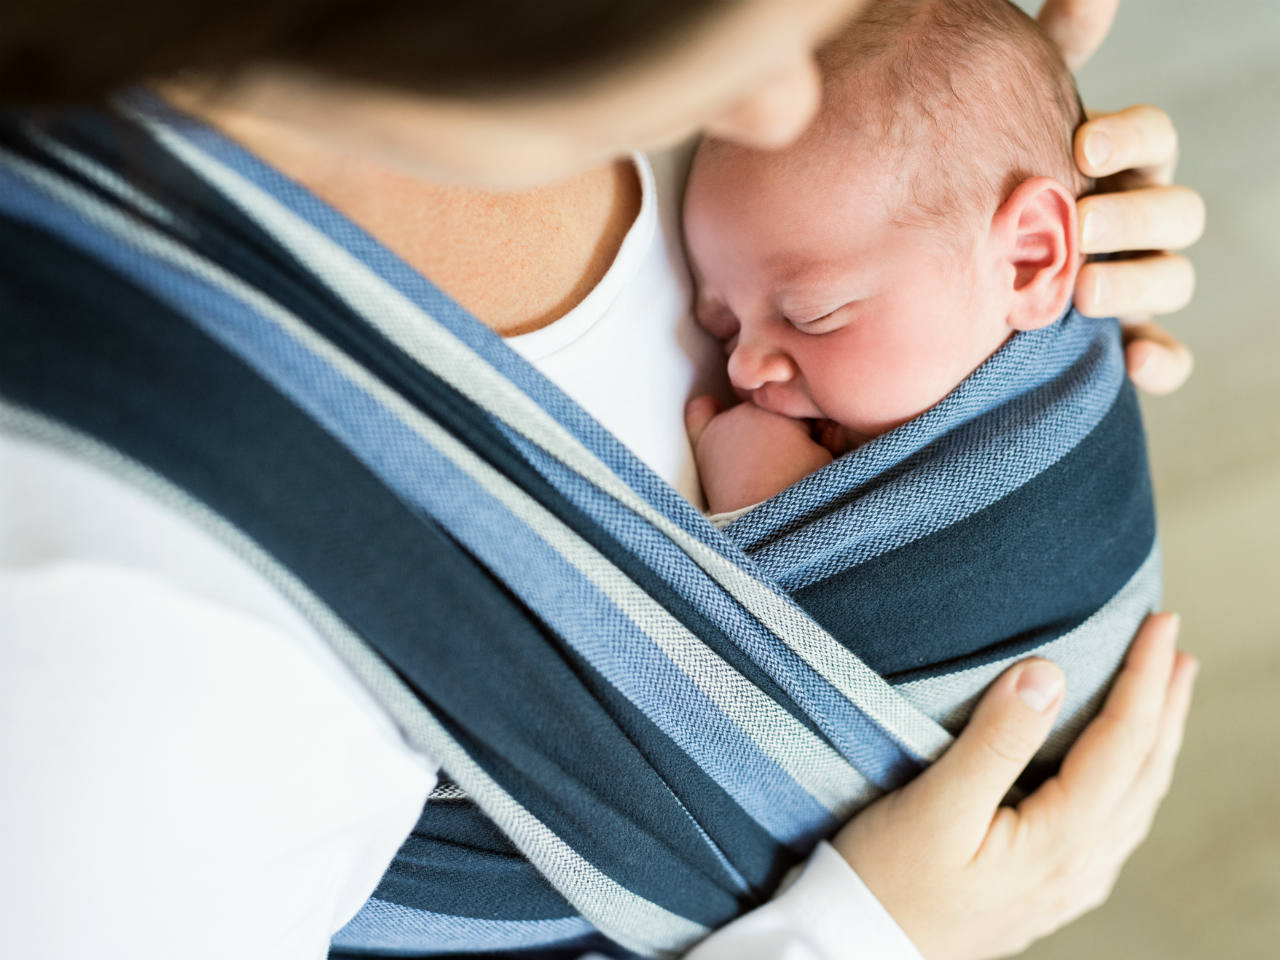 How to use a baby sling safely